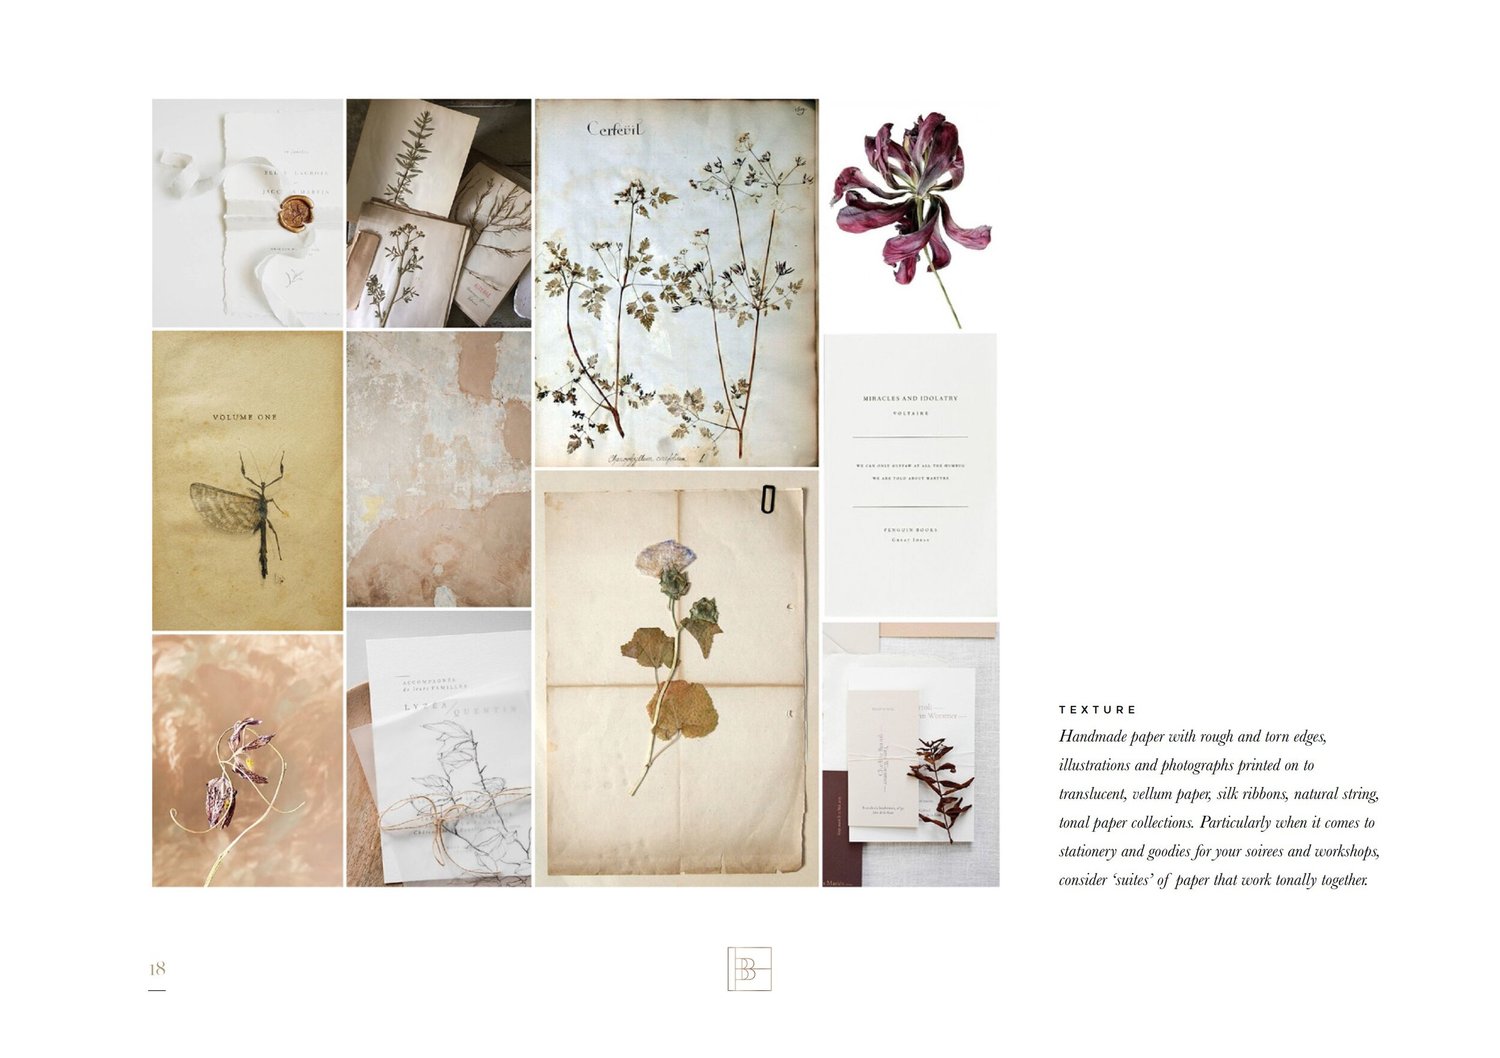 A beautiful brand identity design for renowned floral designer and ...